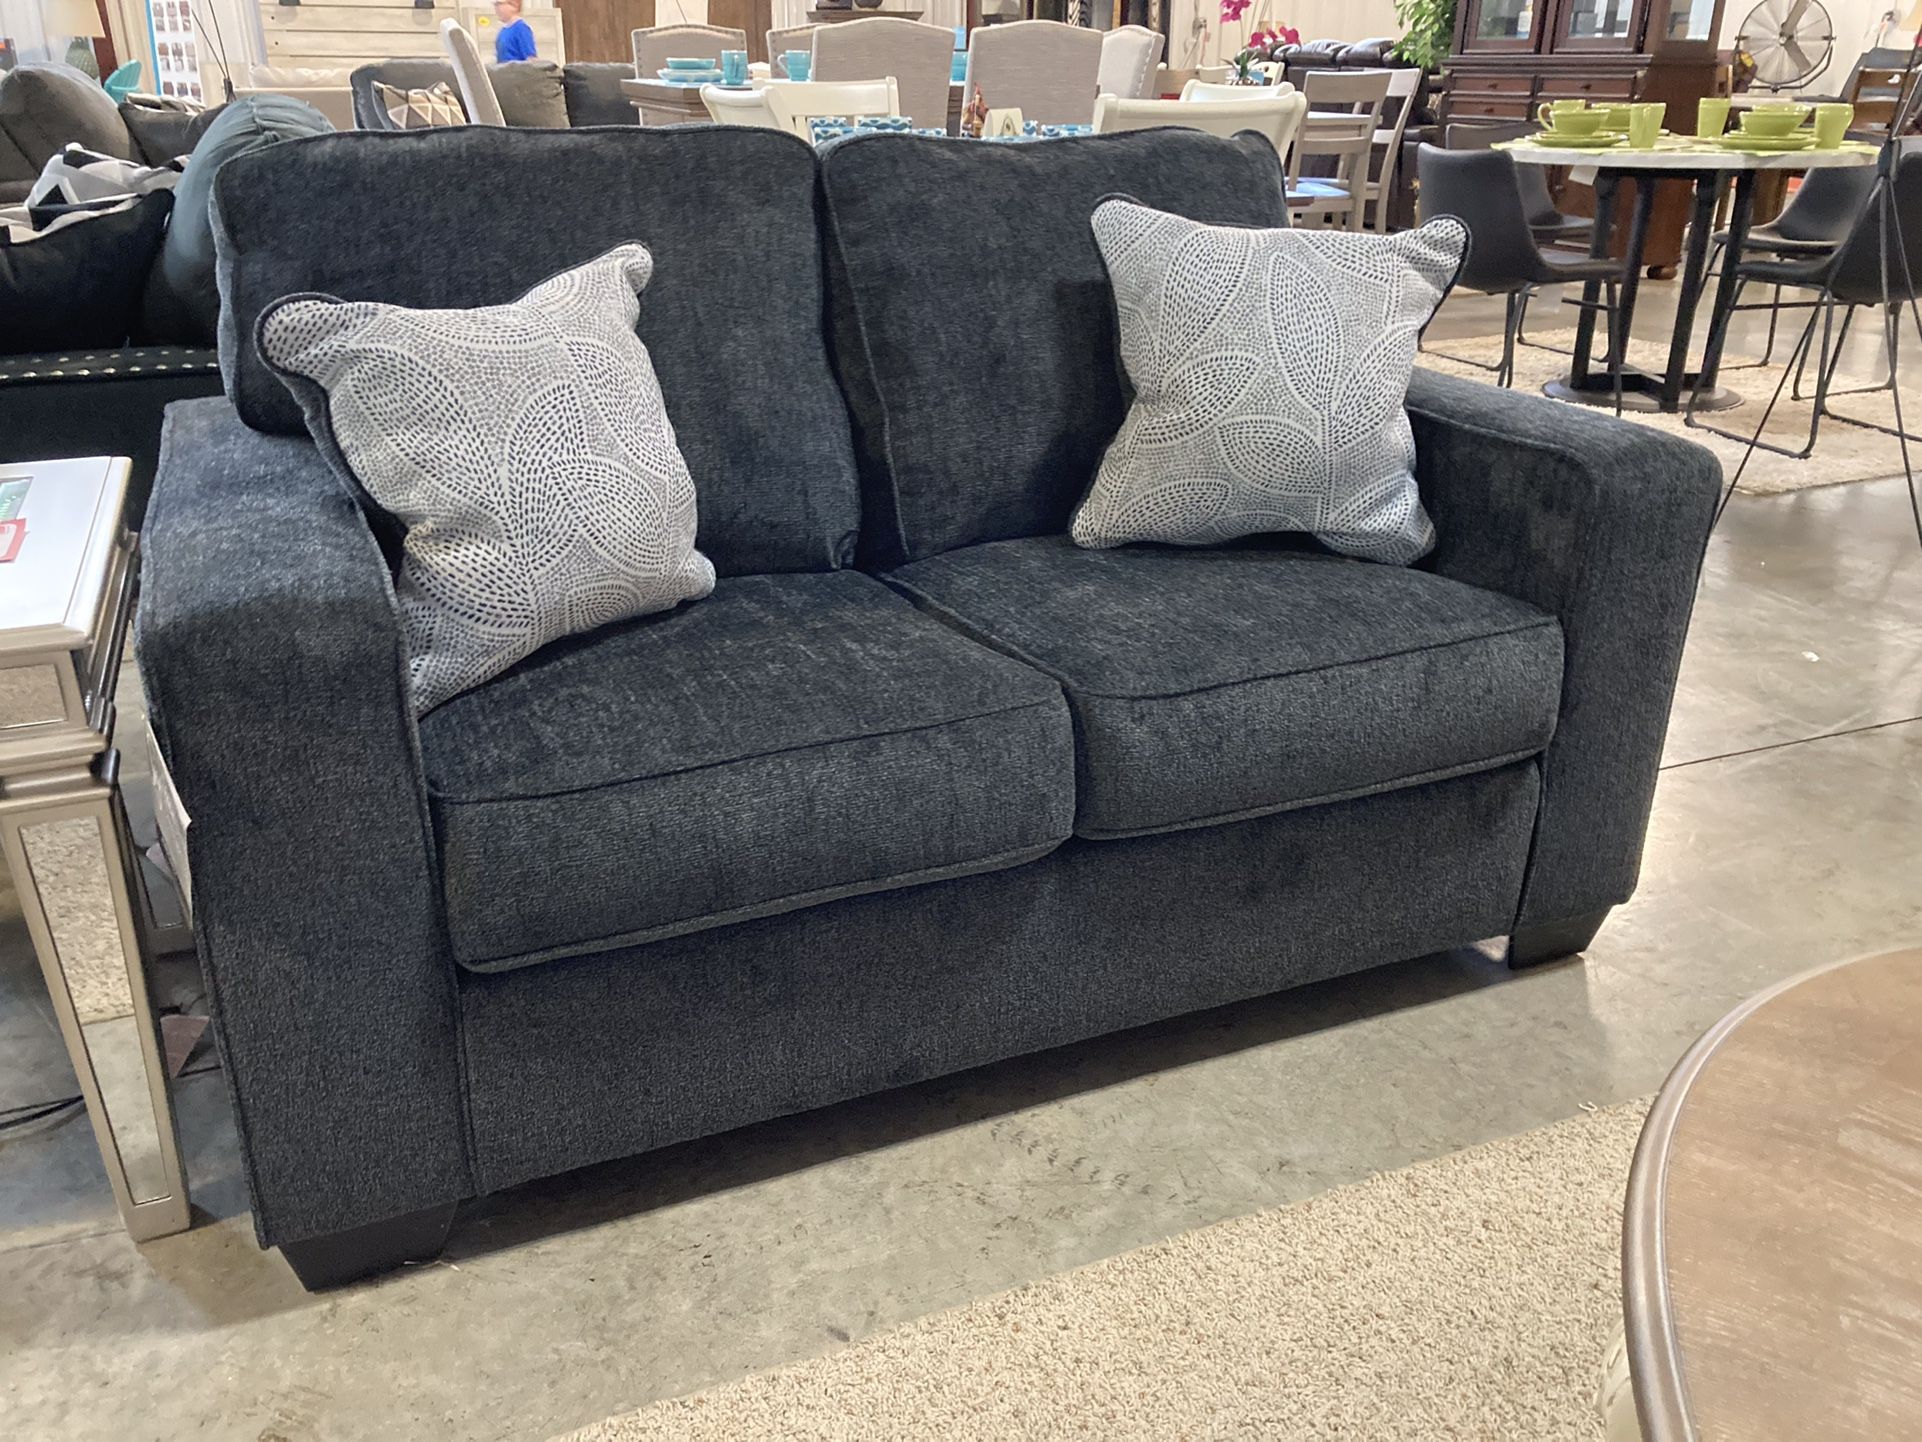 New Loveseat With Free Accent Pillows